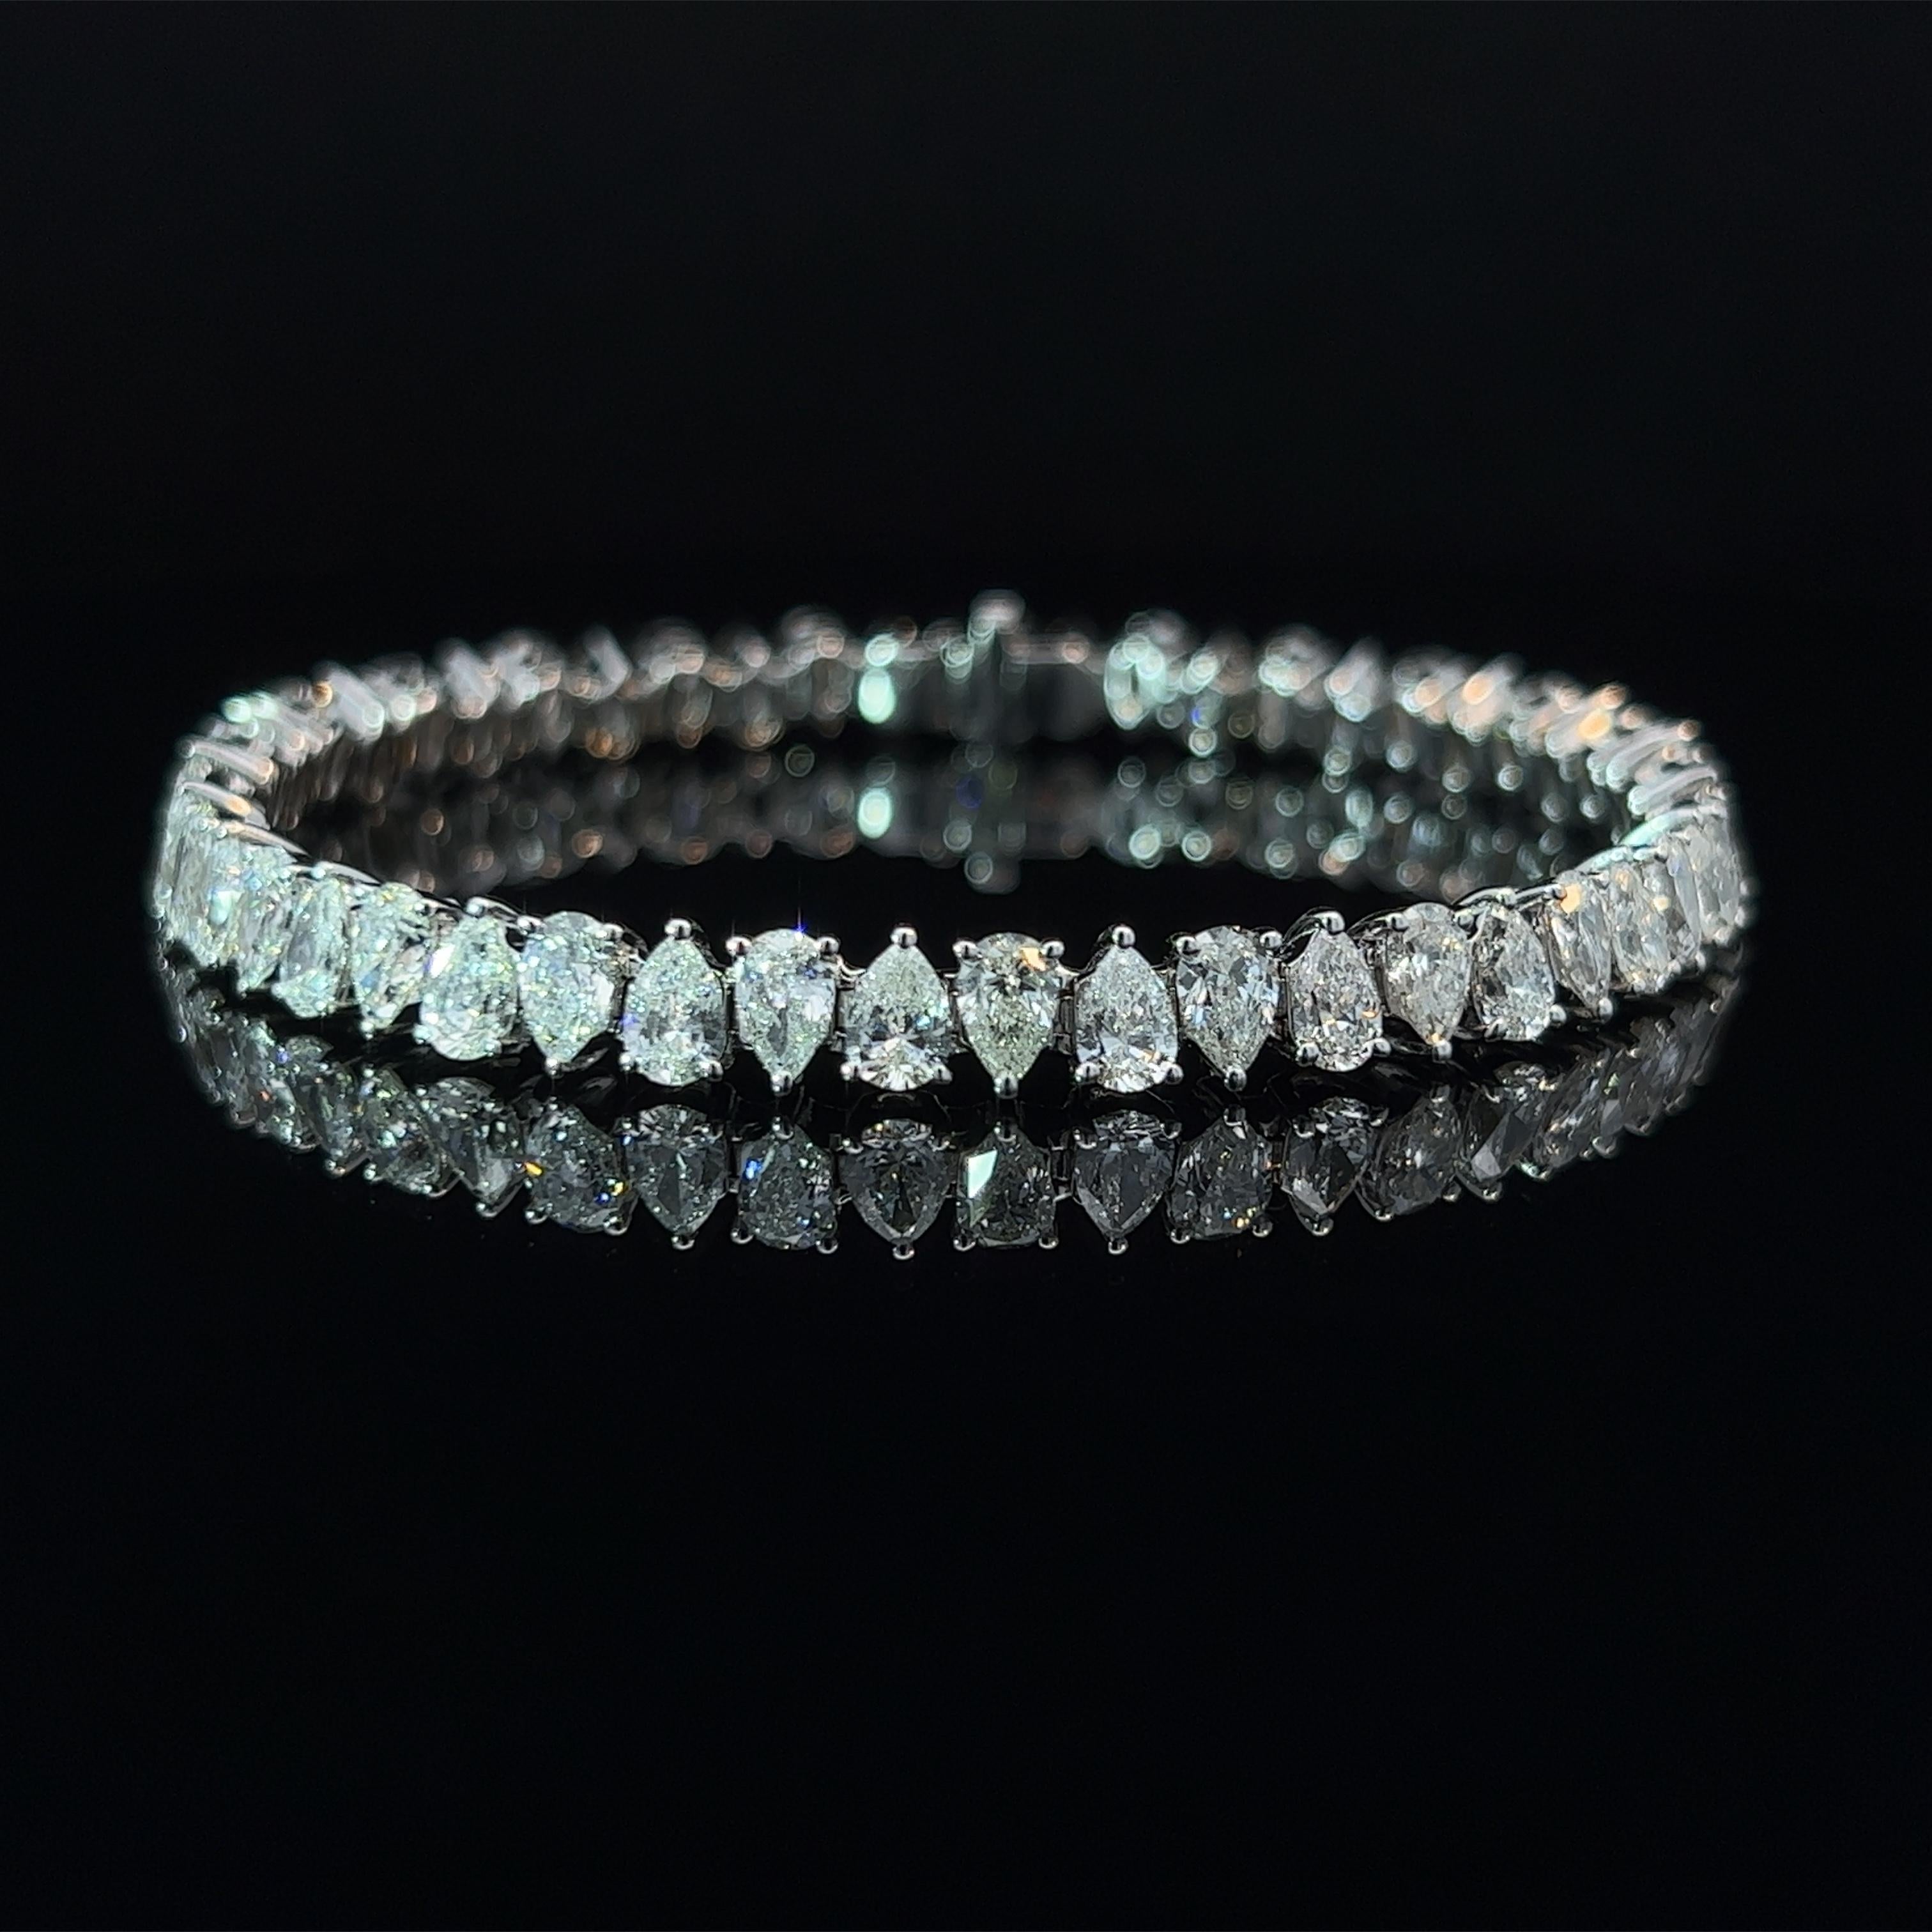 Diamond Shape: Pear Cut 
Total Diamond Weight: 11.89ct
Individual Diamond Weight: .25ct
Color/Clarity: GH VS  
Metal: 18K White Gold  
Metal Weight: 18.59g 

Key Features:

Pear-Cut Diamonds: The centerpiece of this bracelet features a dazzling